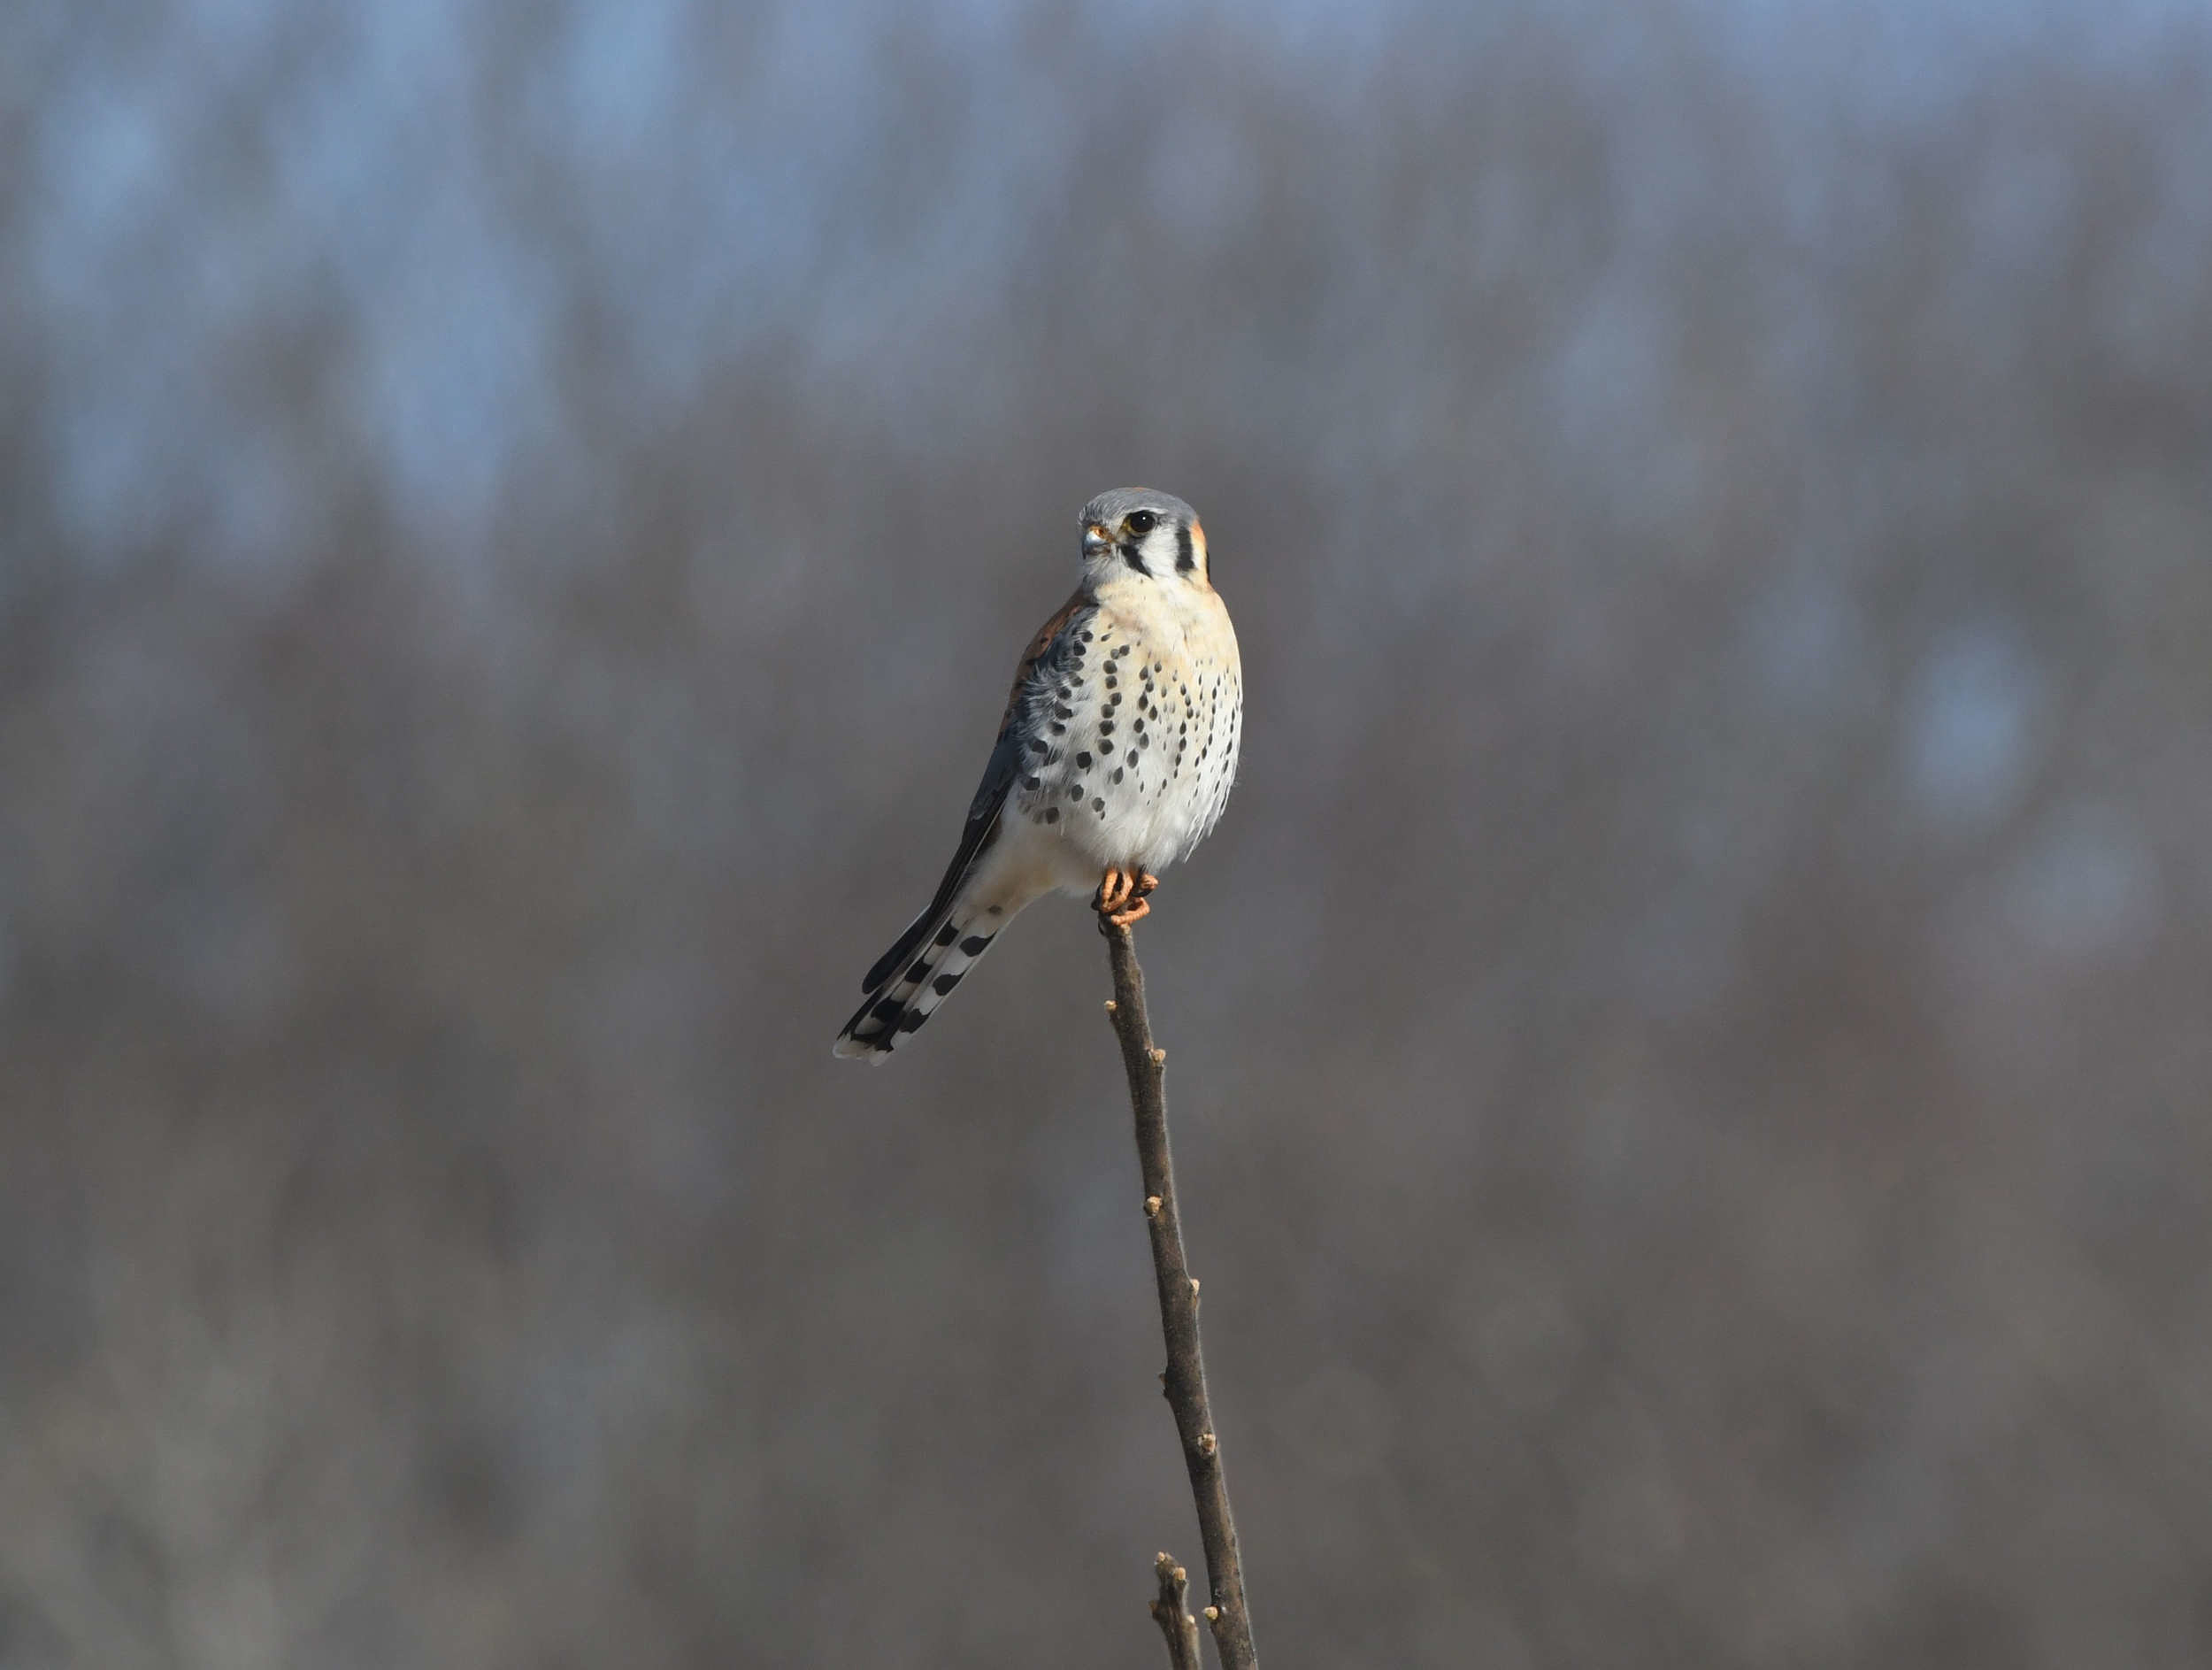 An American Kestrel, perched on a twig. (photo © Eric Masterson)